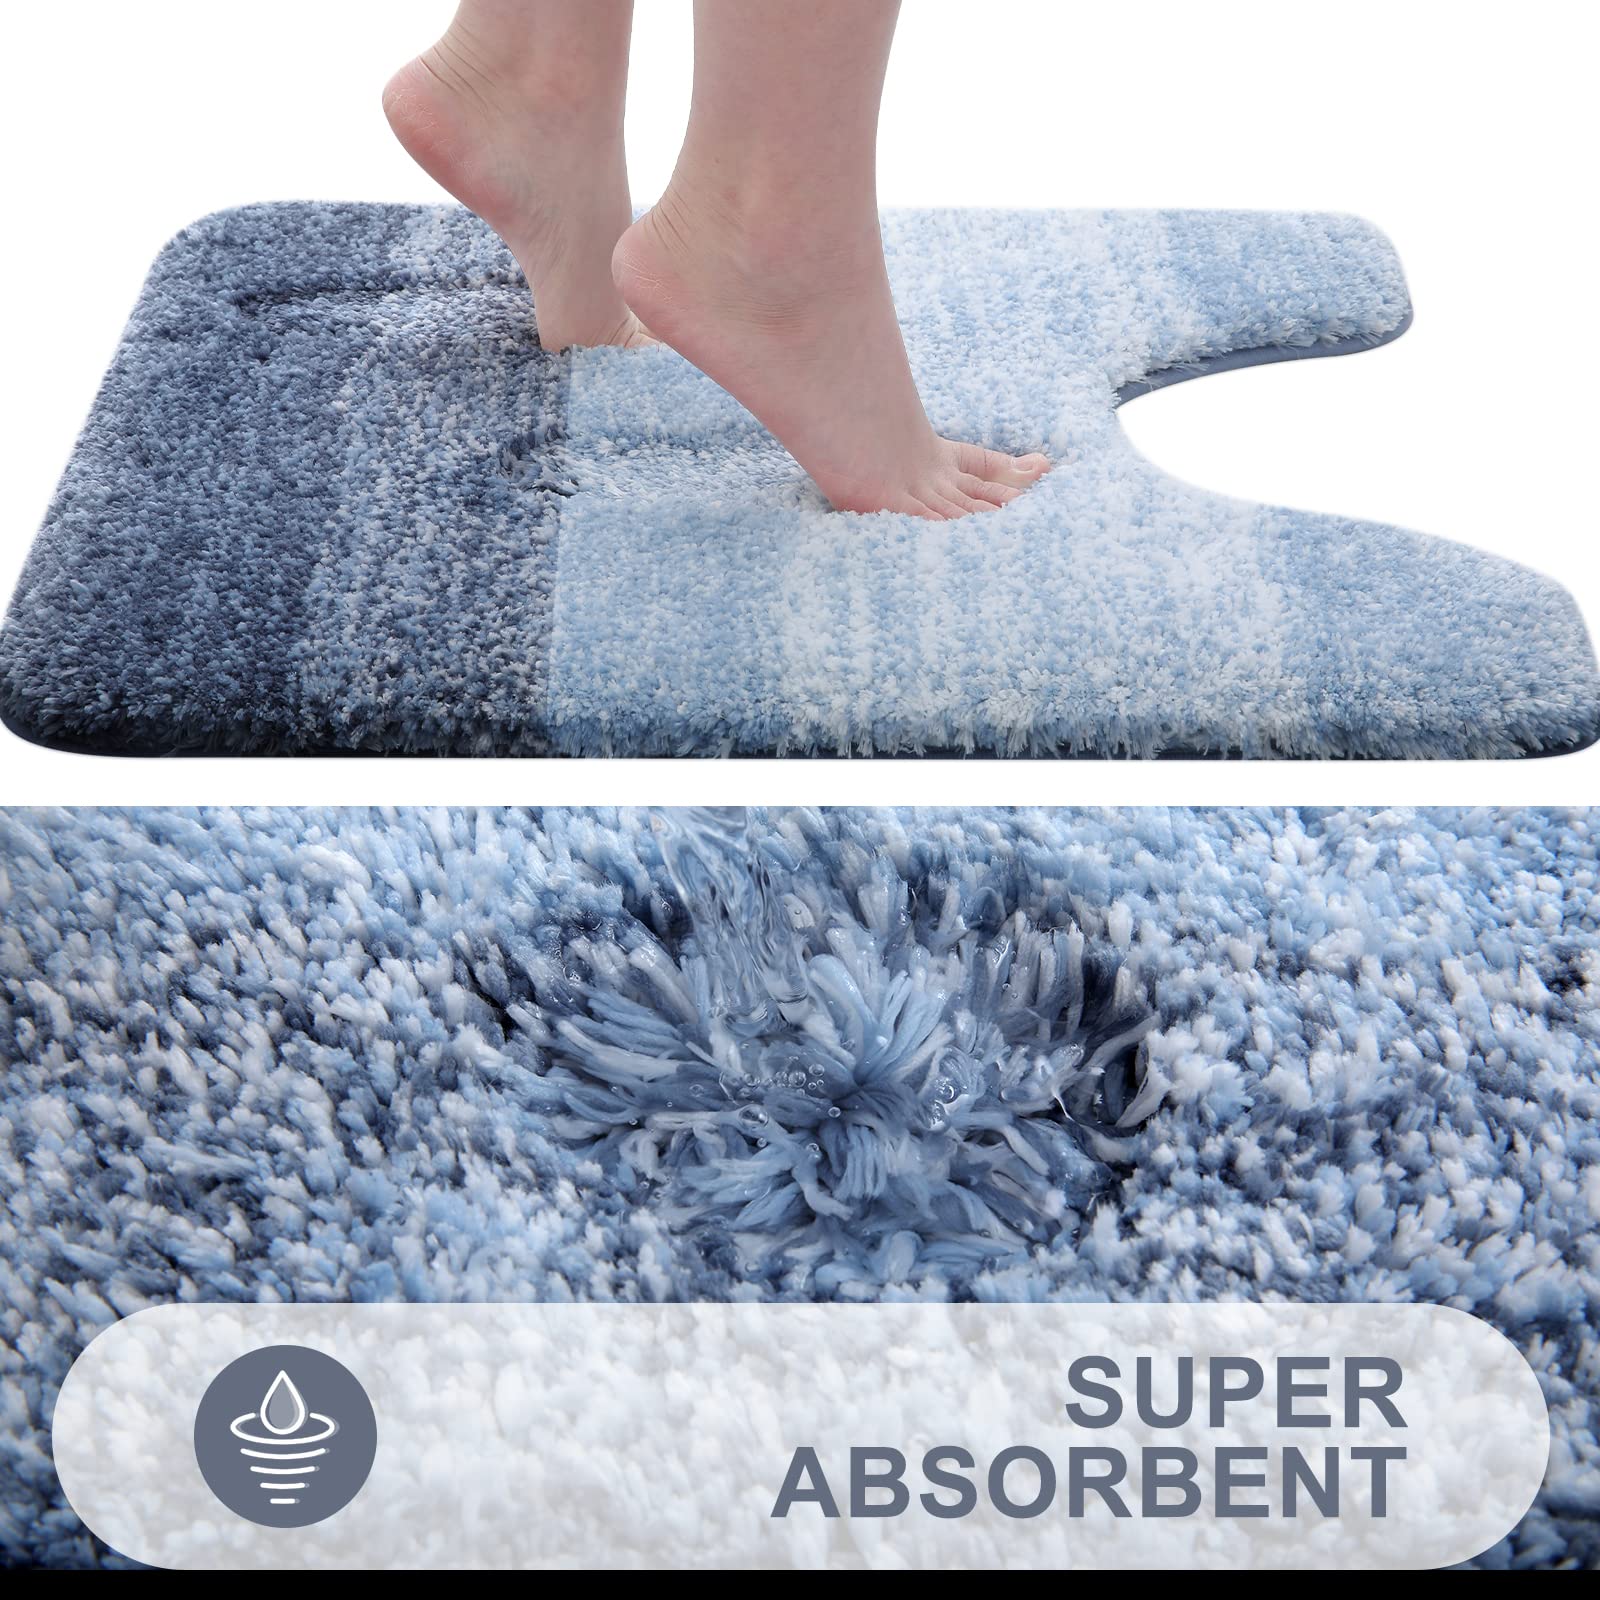 Buganda Luxury U-Shaped Bathroom Rugs, Super Soft and Absorbent Microfiber Toilet Bath Mats, Non-Slip Contour Bathroom Carpets with Rubber Backing, 20X24, Blue - image 5 of 7